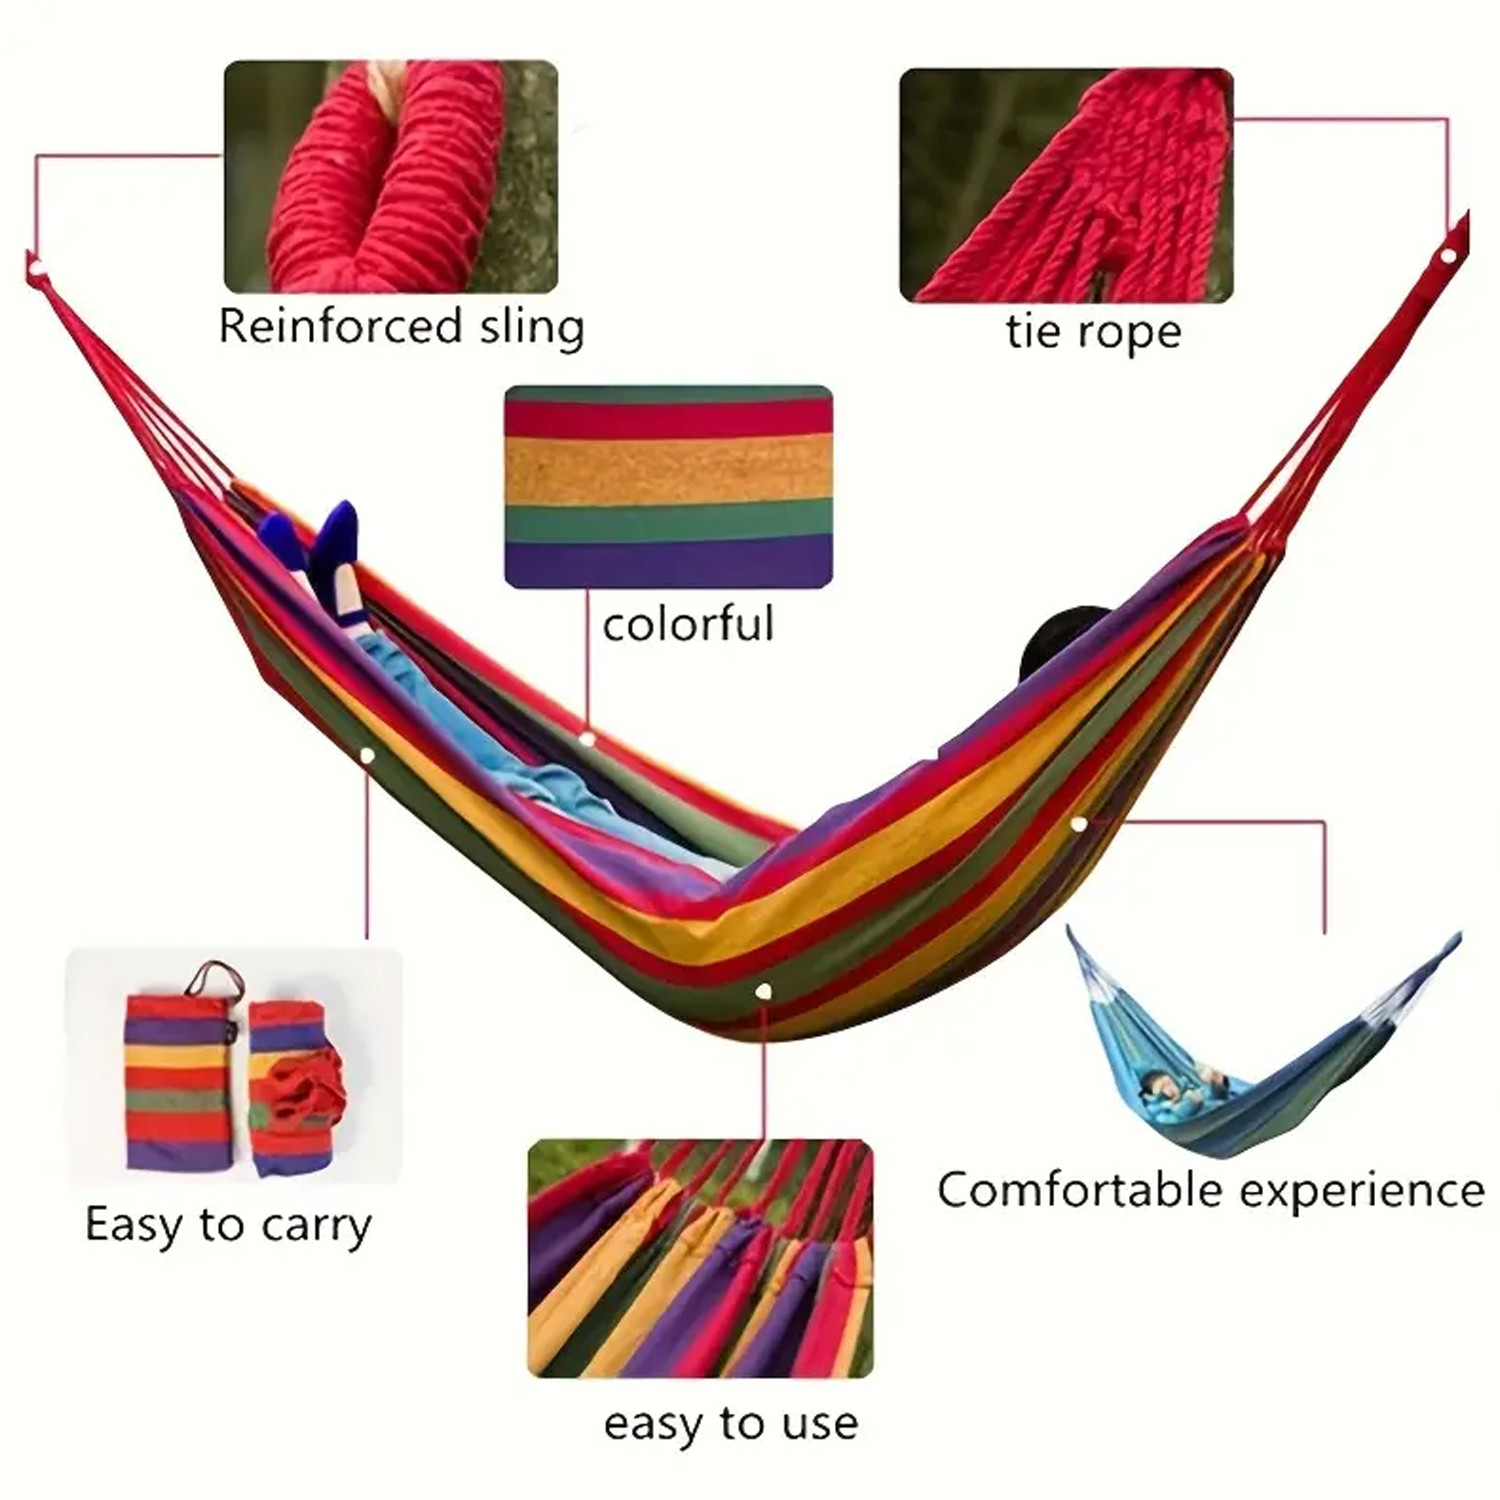 Kuber Industries Canvas Travel Hammock |Garden Hammock Swing For Adults|130 KG Load Bearing Capicity|Including 2 Rope, 1 Bag (Red & Yellow)